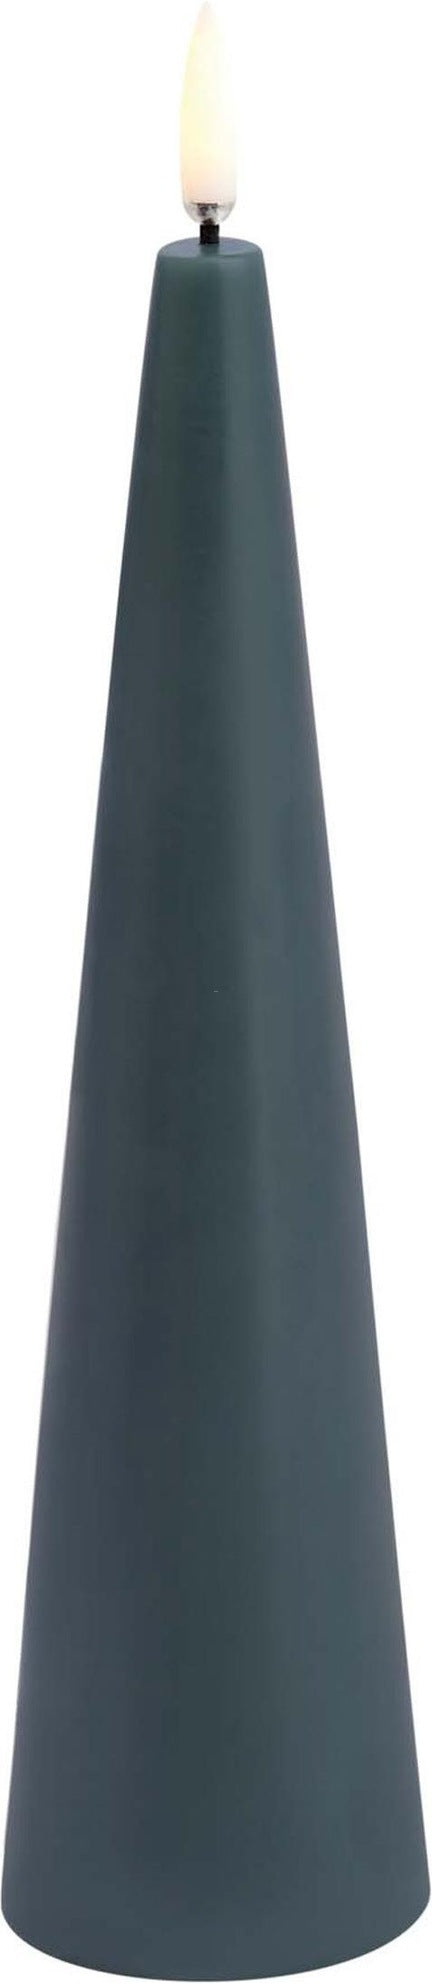 LED Cone Candle - Pine Green 5.8 x 21.5cm